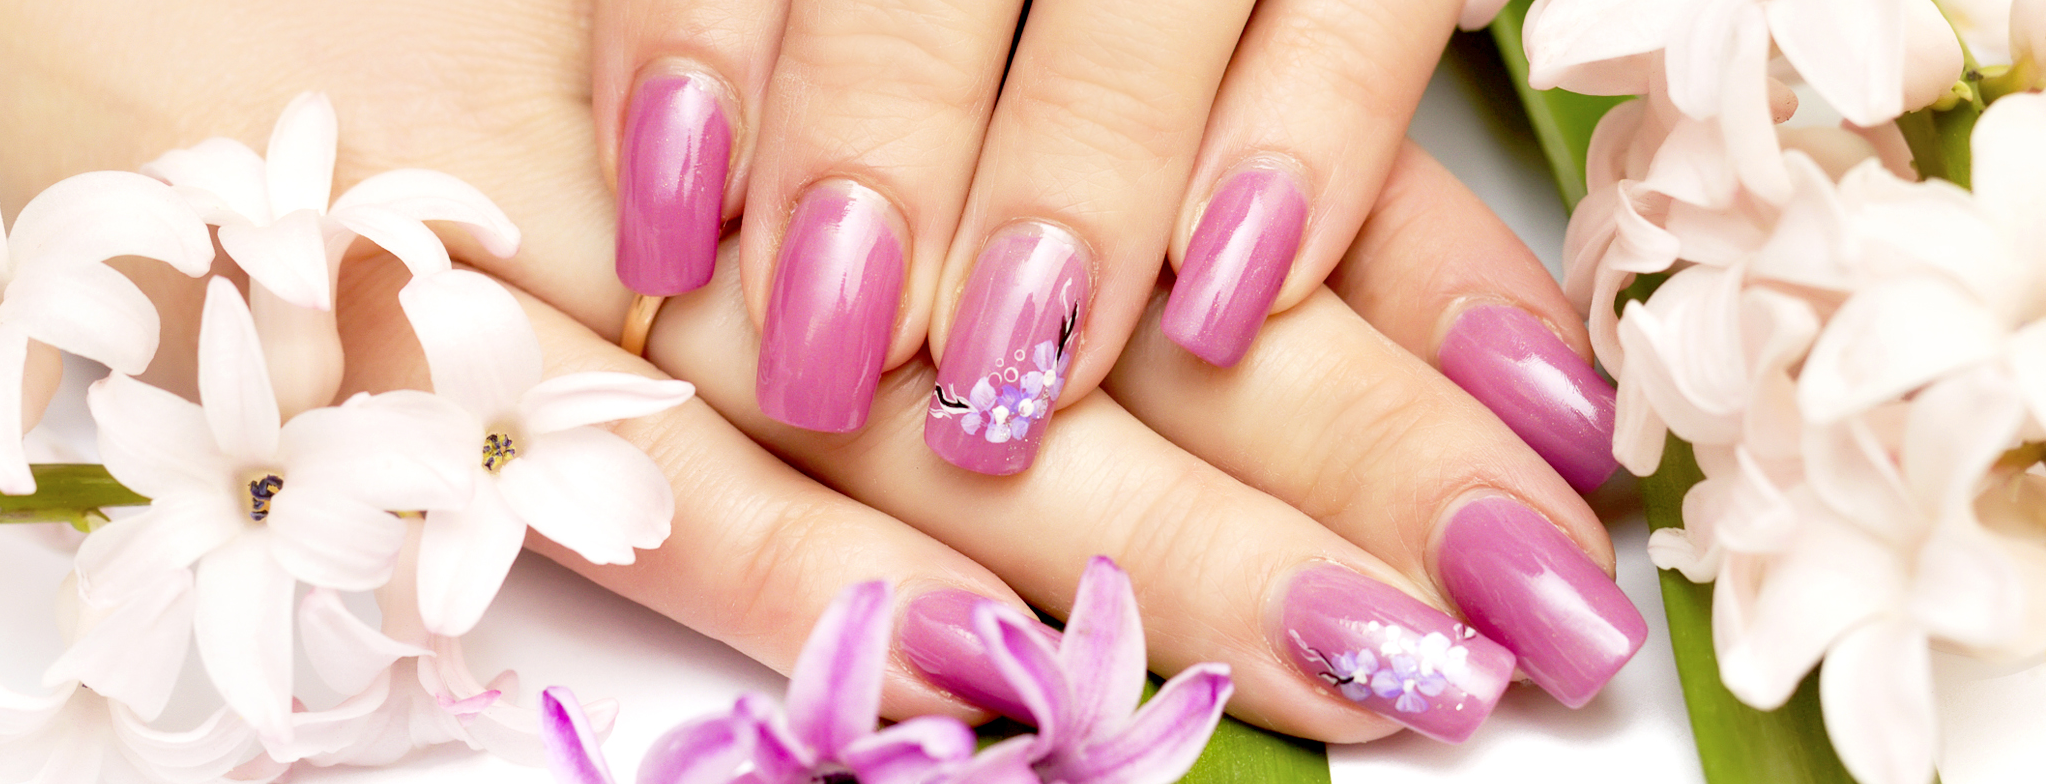 Trendy Manicure and Pedicure Nail Art Ideas - wide 1